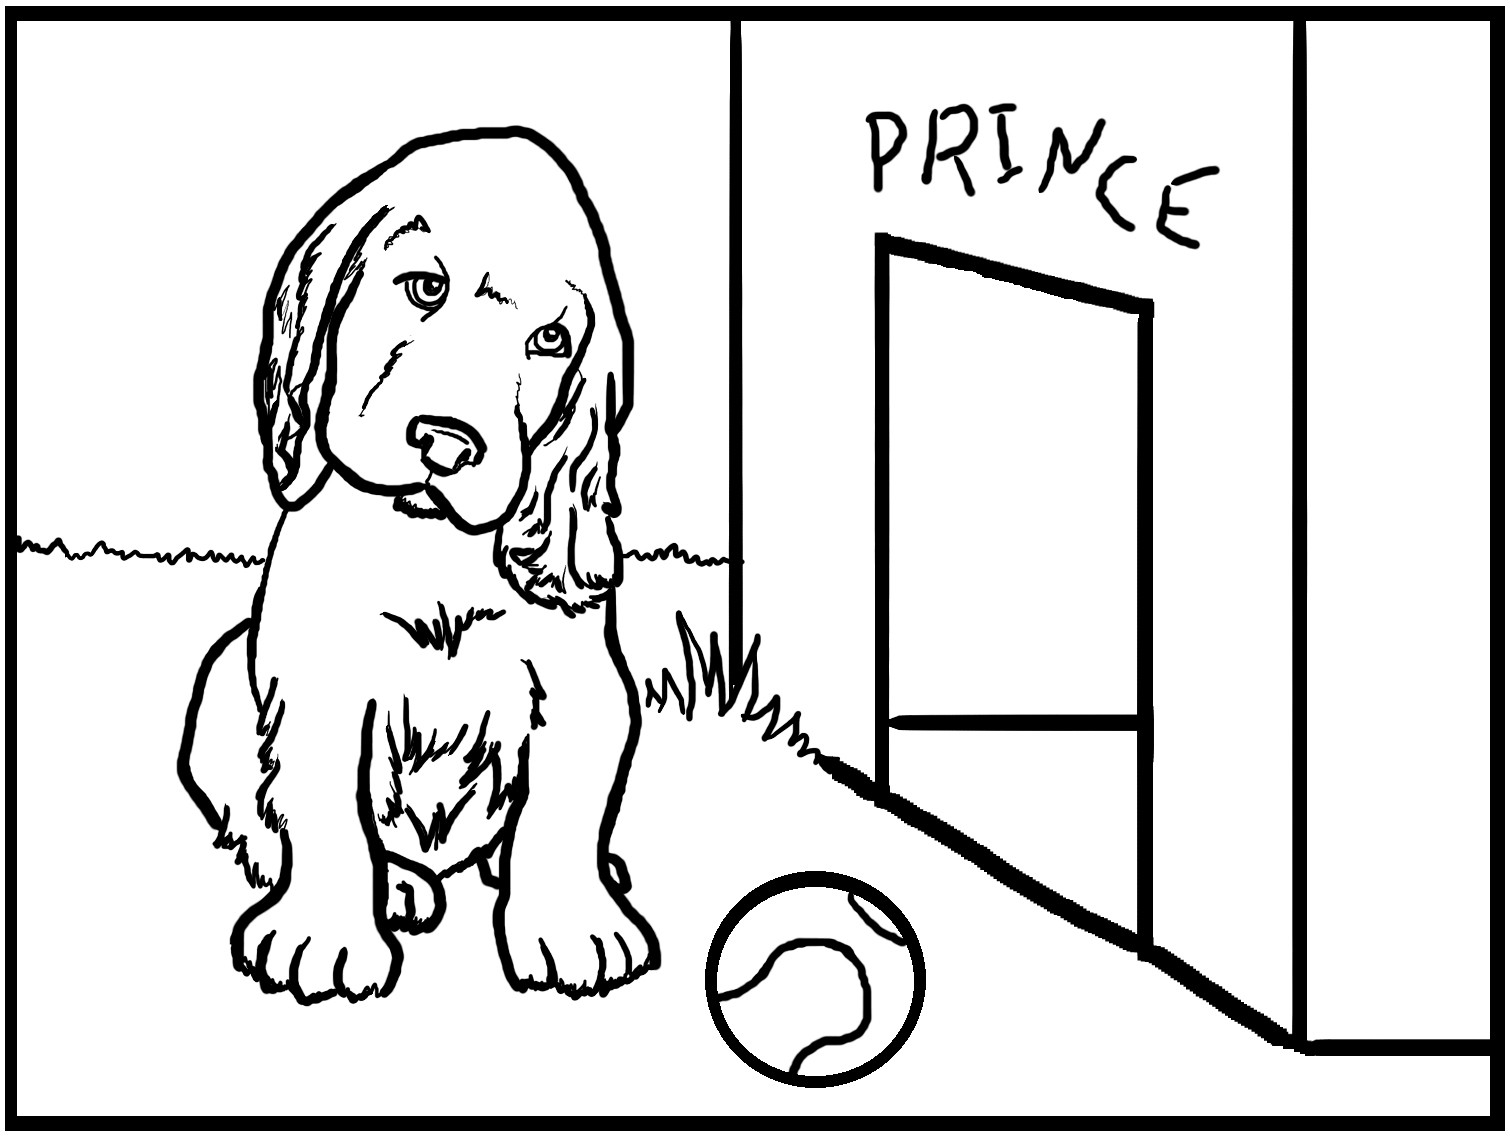 Coloring Sheets For Kids Of Dogs
 Free Printable Dog Coloring Pages For Kids